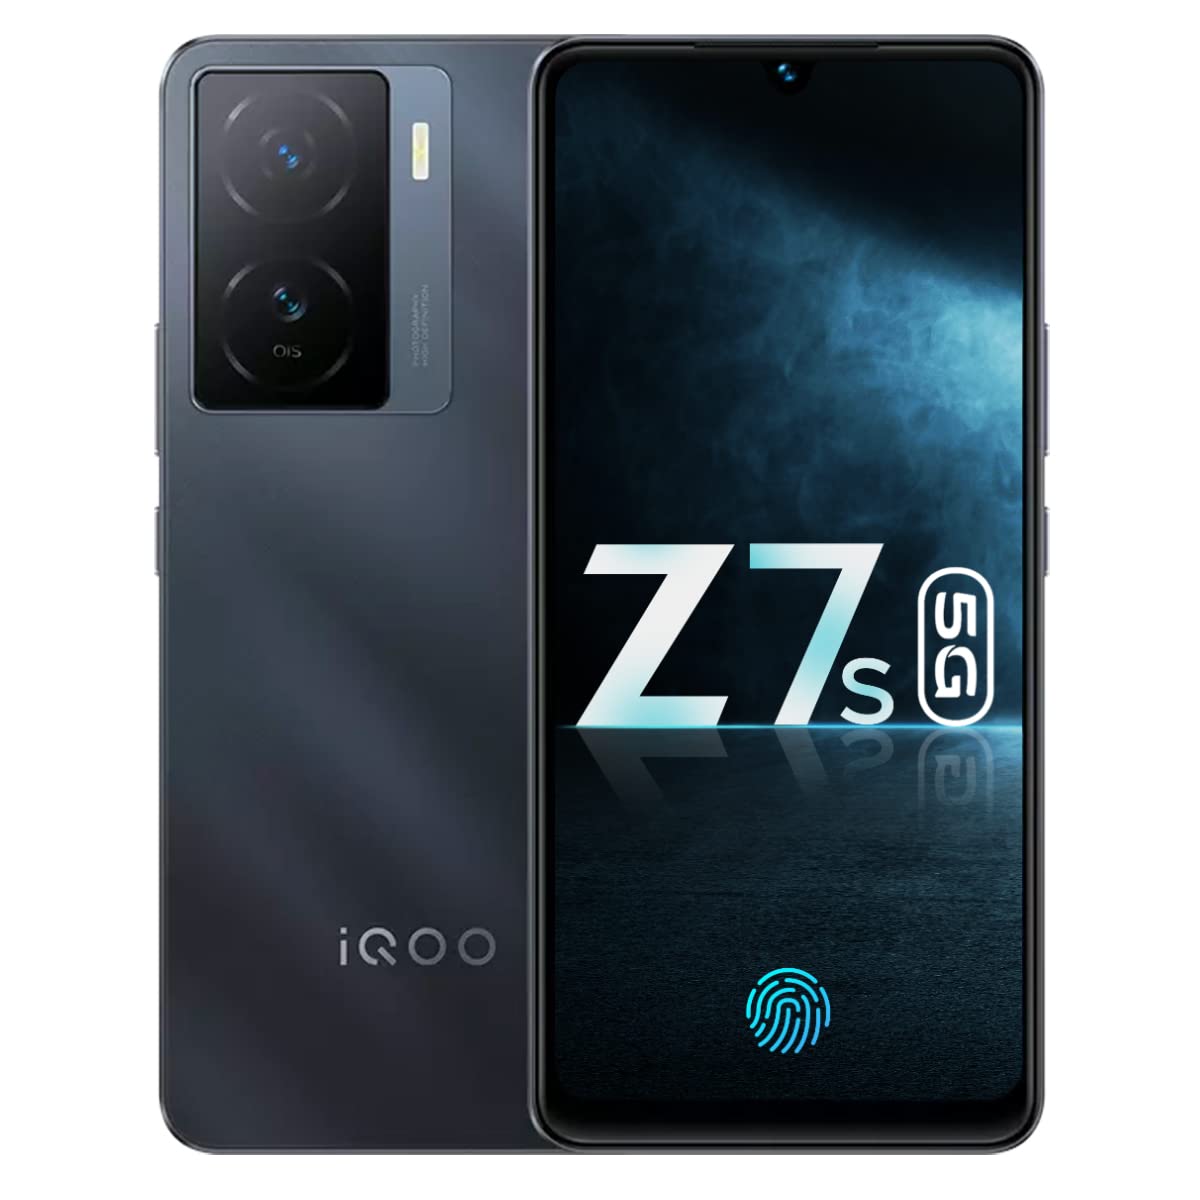 iQOO Z7s 5G by vivo (Norway Blue, 6GB RAM, 128GB Storage) | Ultra Bright AMOLED Display | Snapdragon 695 5G 6nm Processor | 64 MP OIS Ultra Stable Camera | 44WFlashCharge